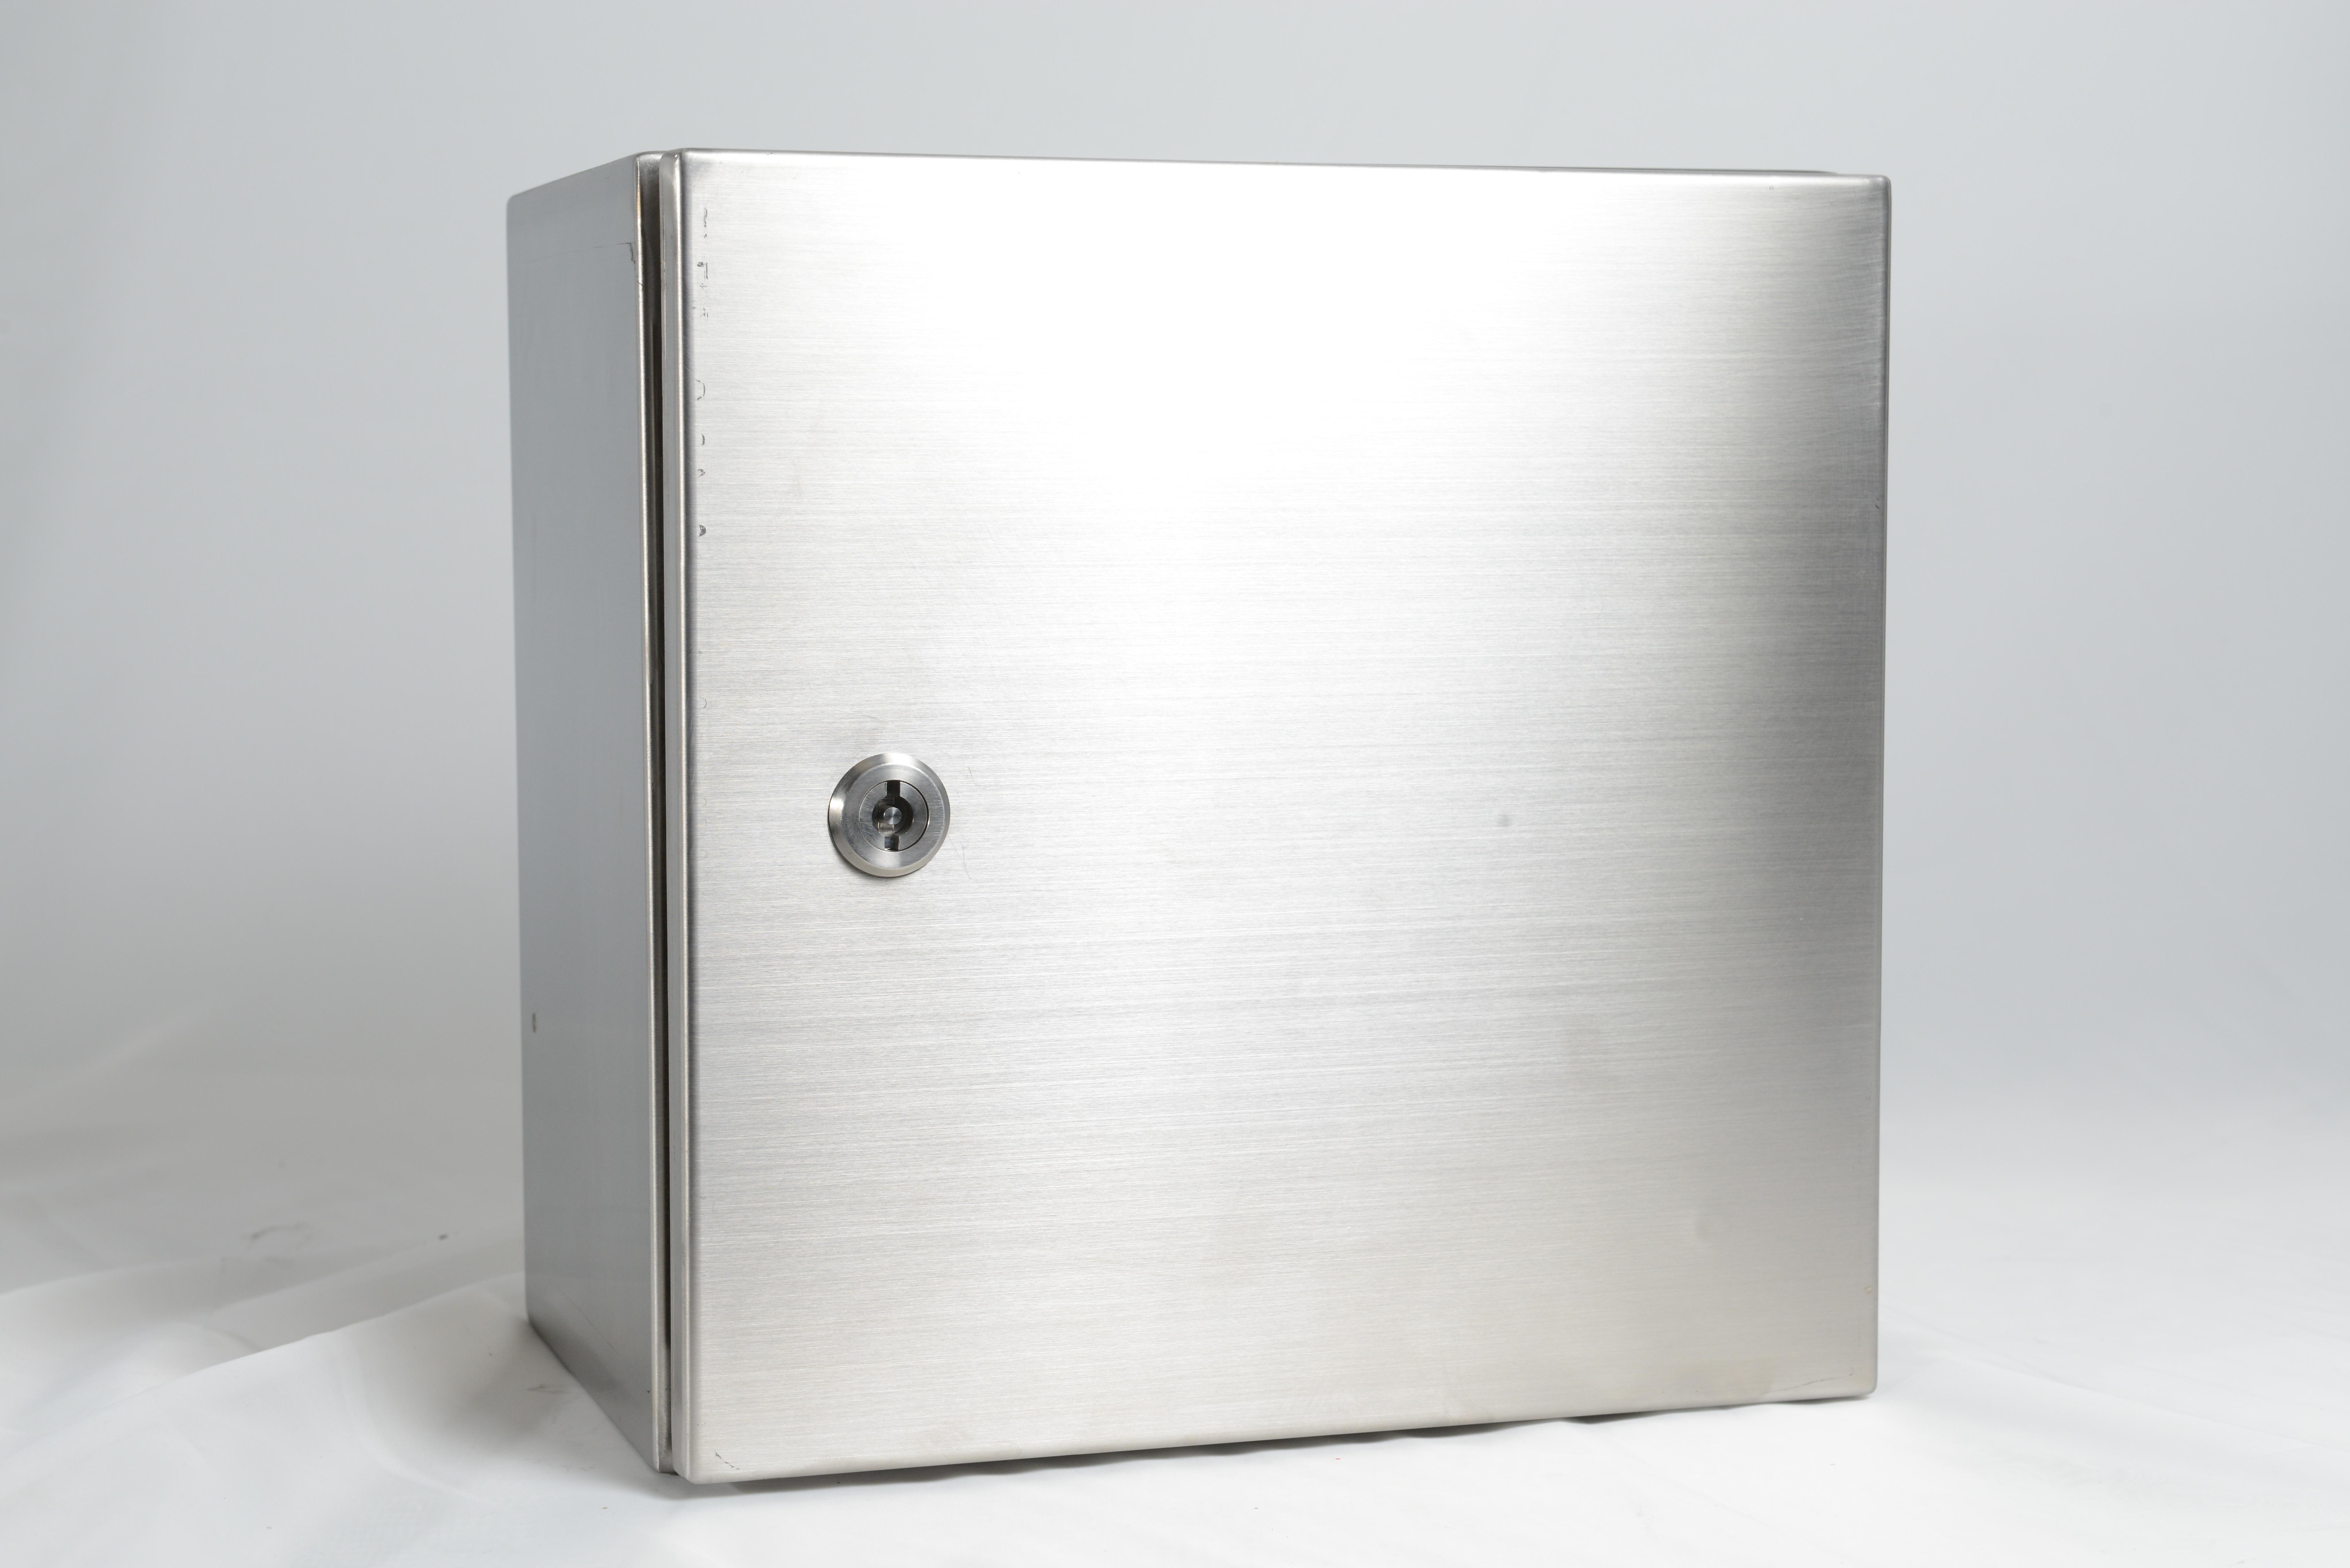 RCG stainless steel enclosure 316 grade 300x300x200mm - wall mounting